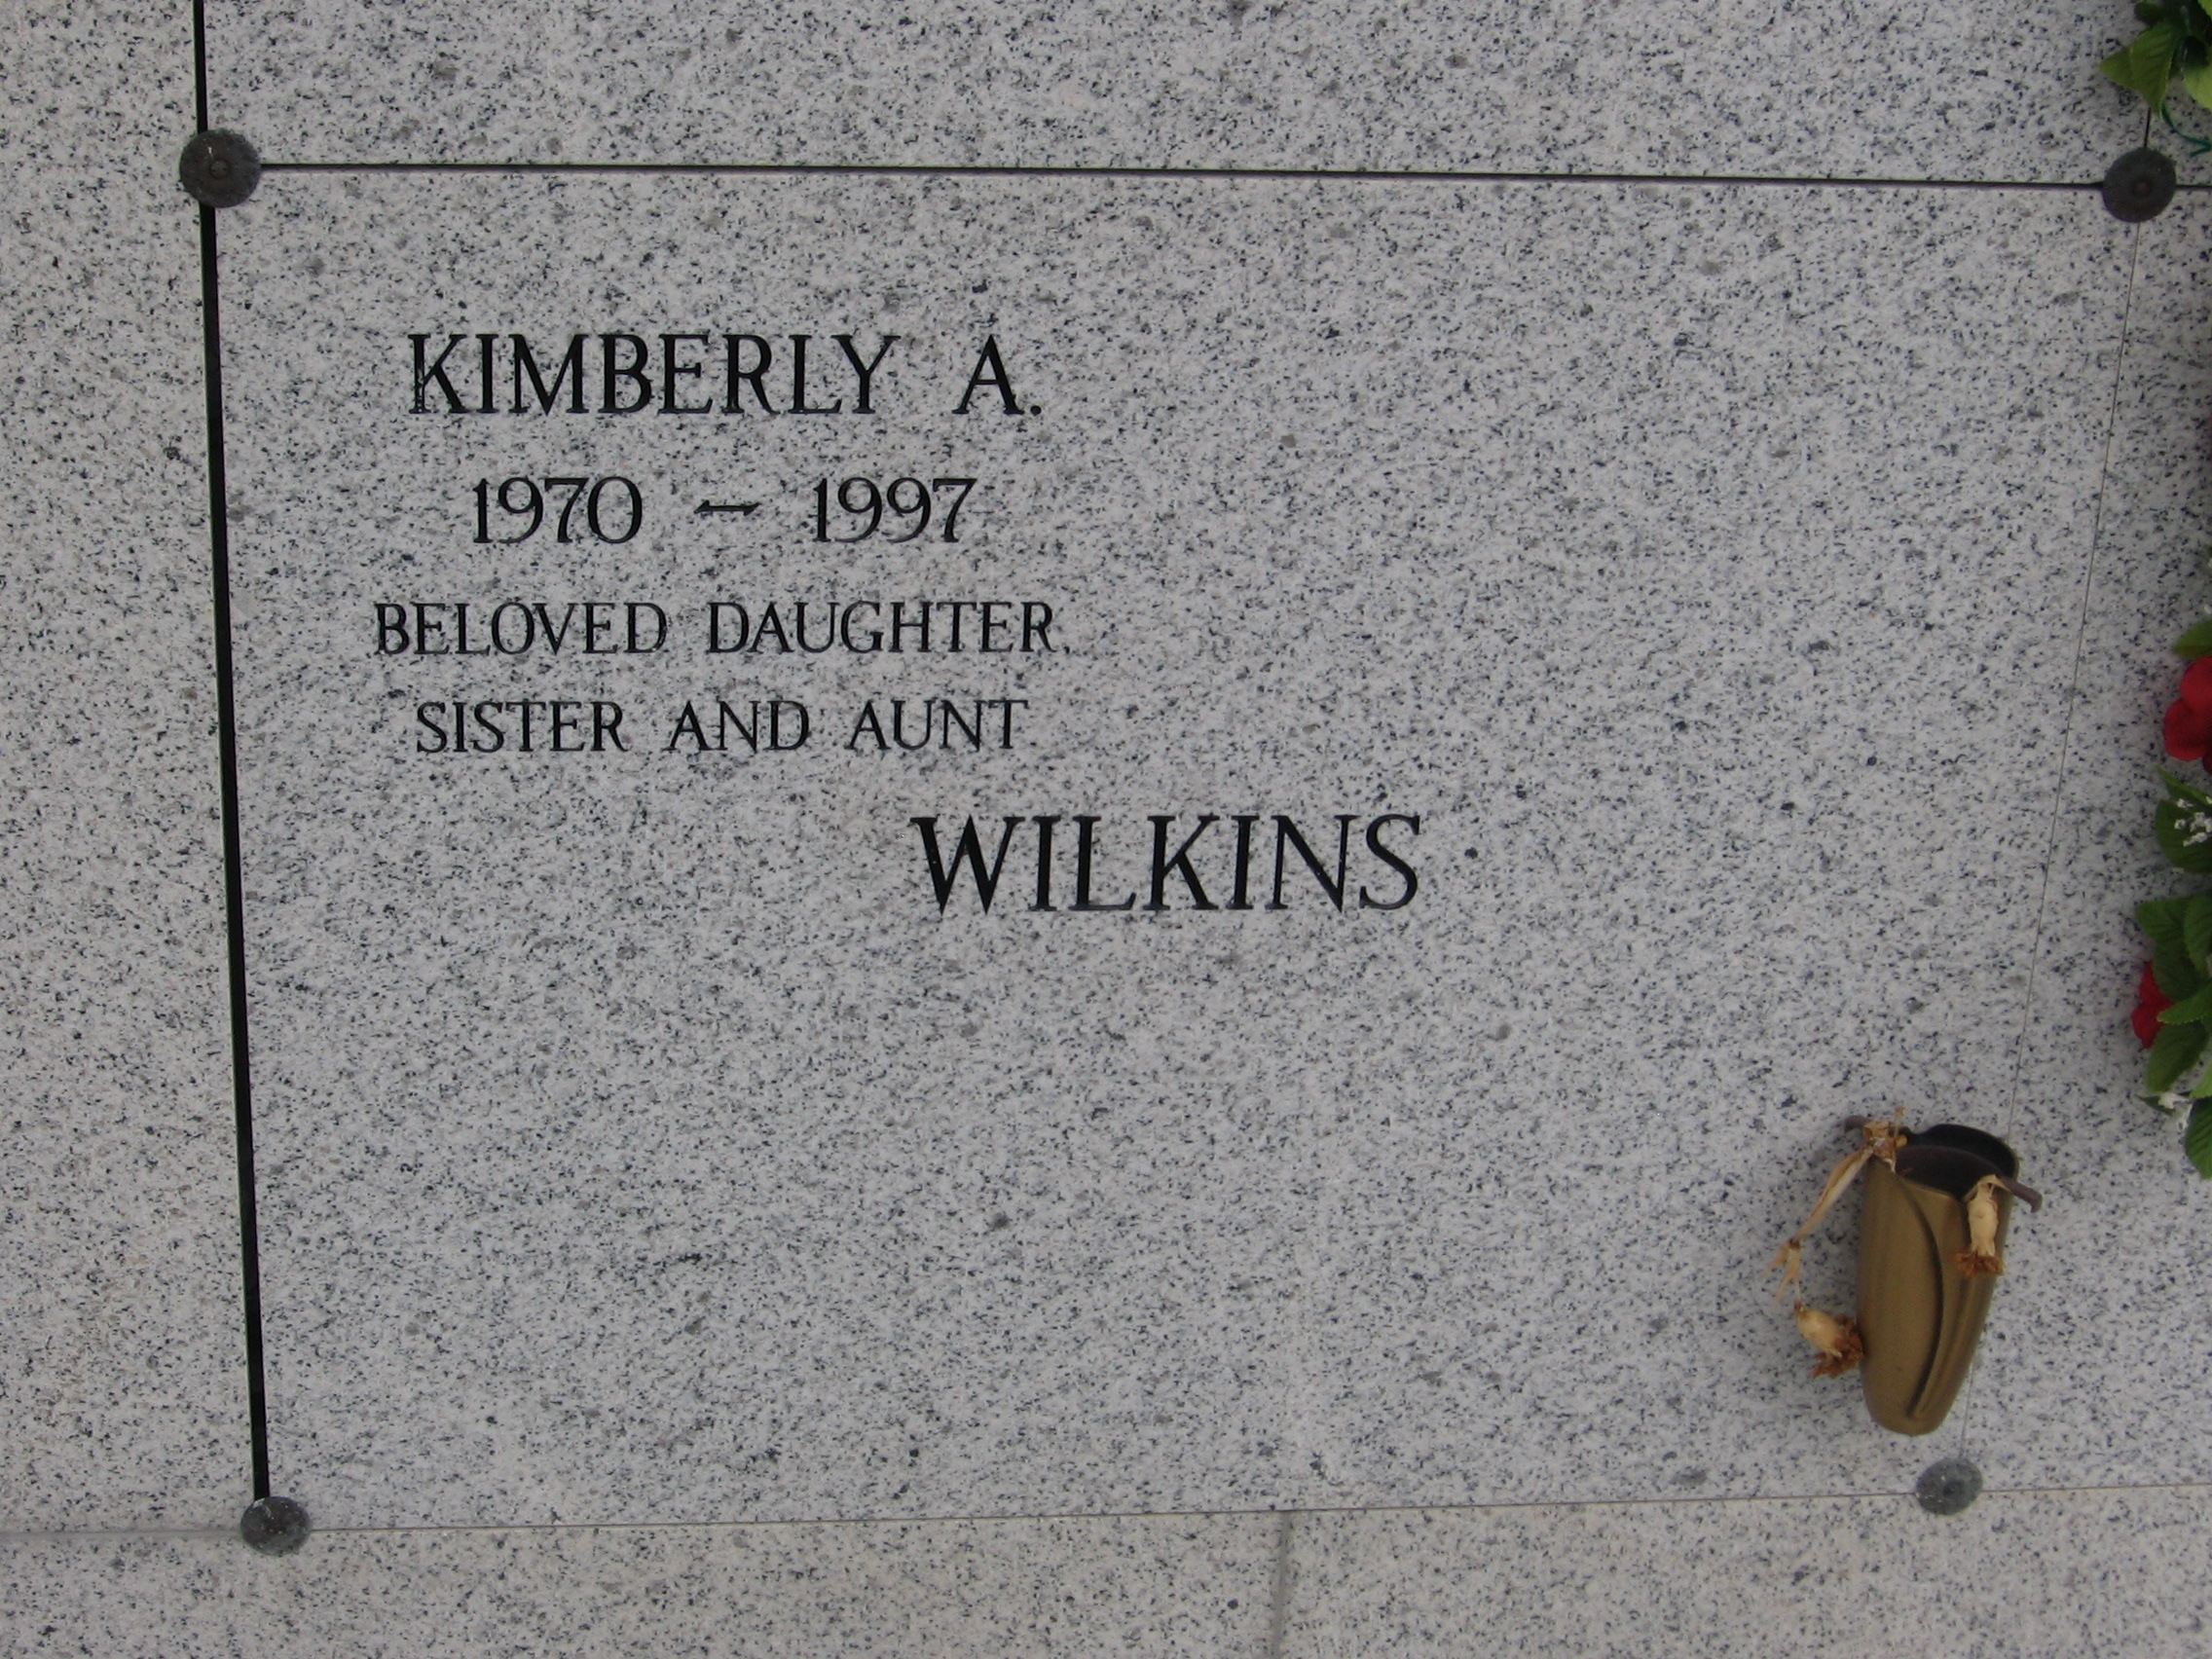 Kimberly A Wilkes